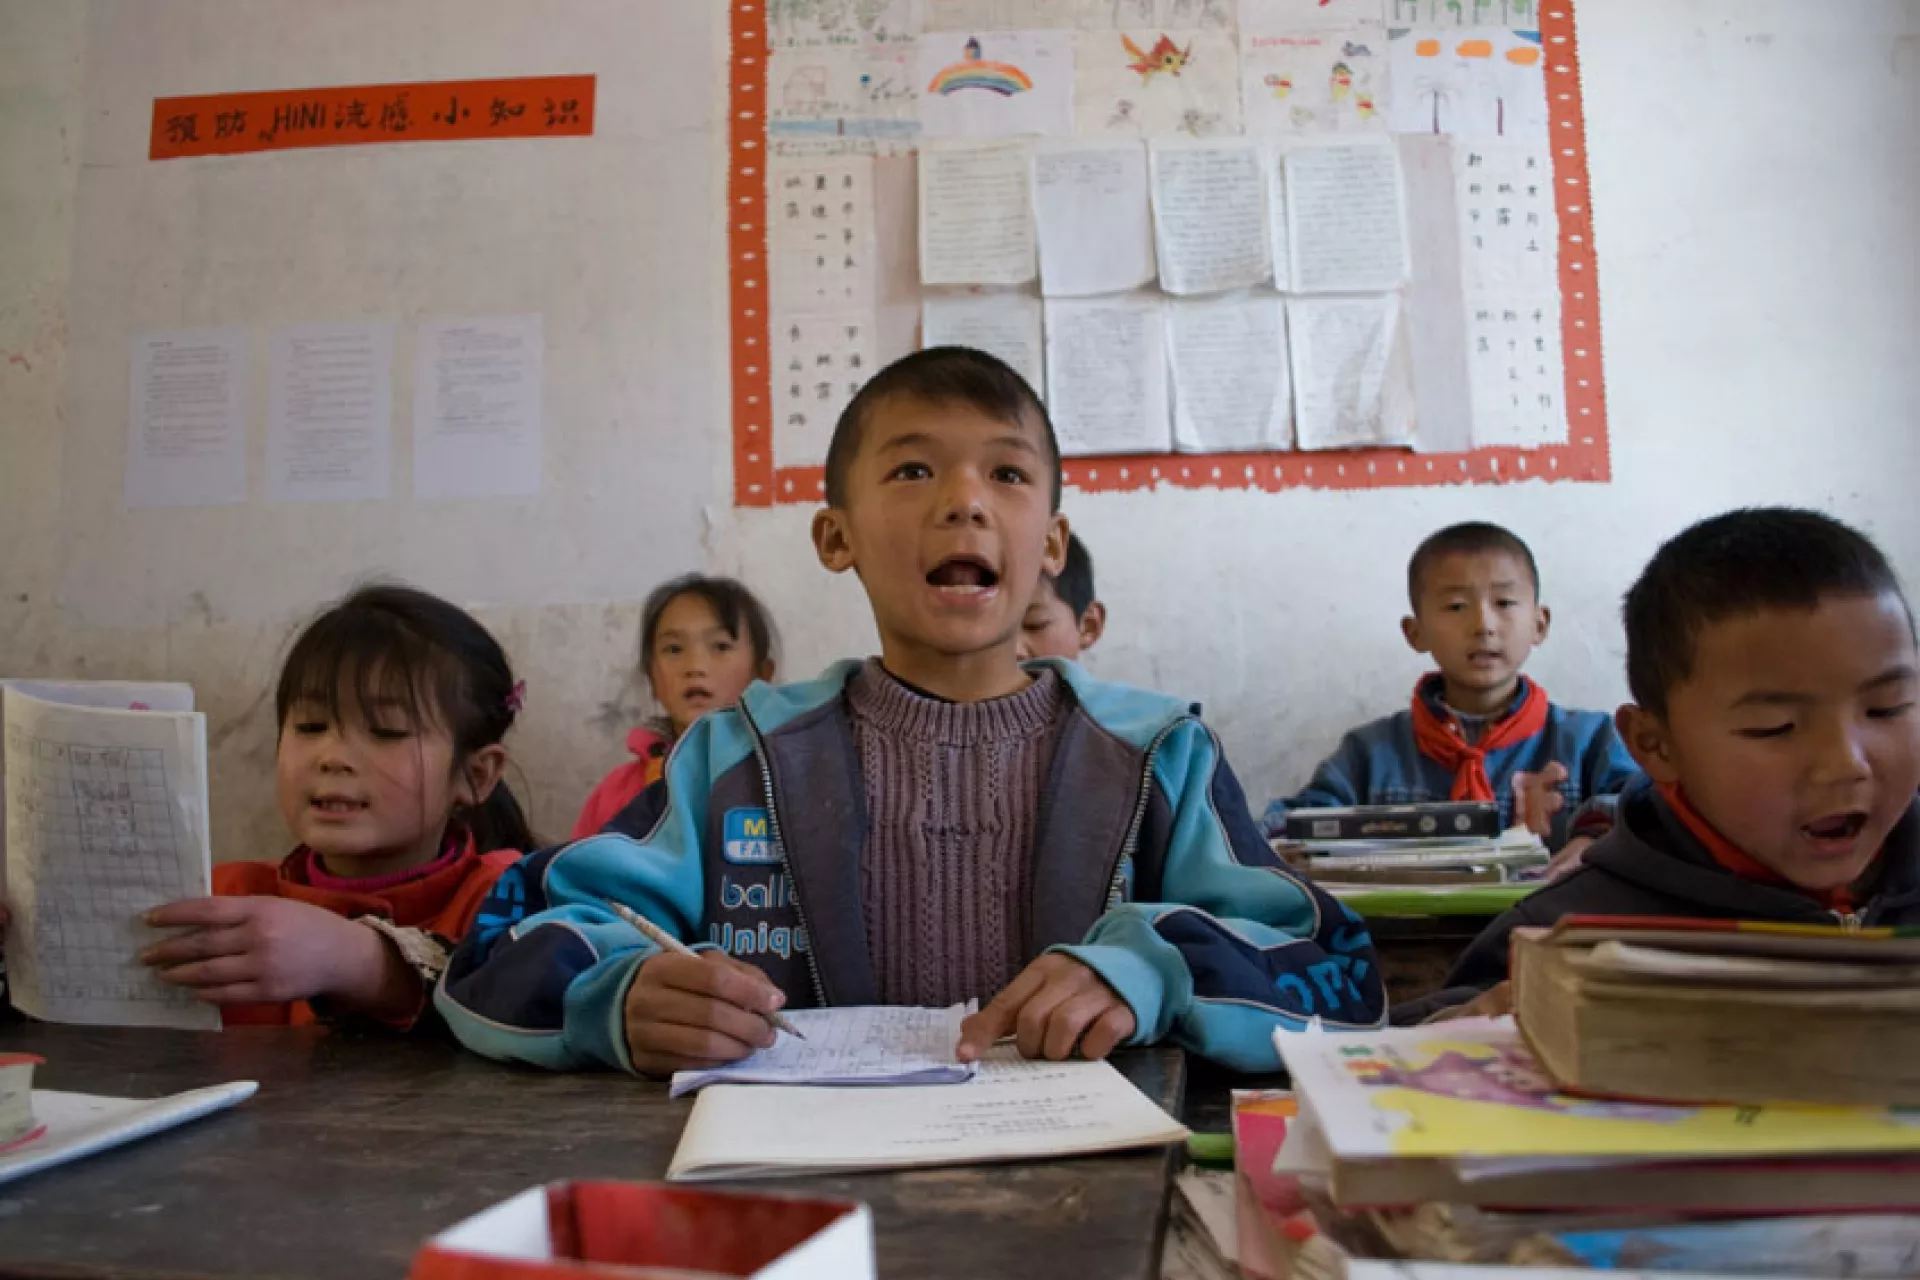 The gap between China's cities and rural areas is a challenging reality for children in Yongping County, Yunnan Province, one of the poorest counties of China.